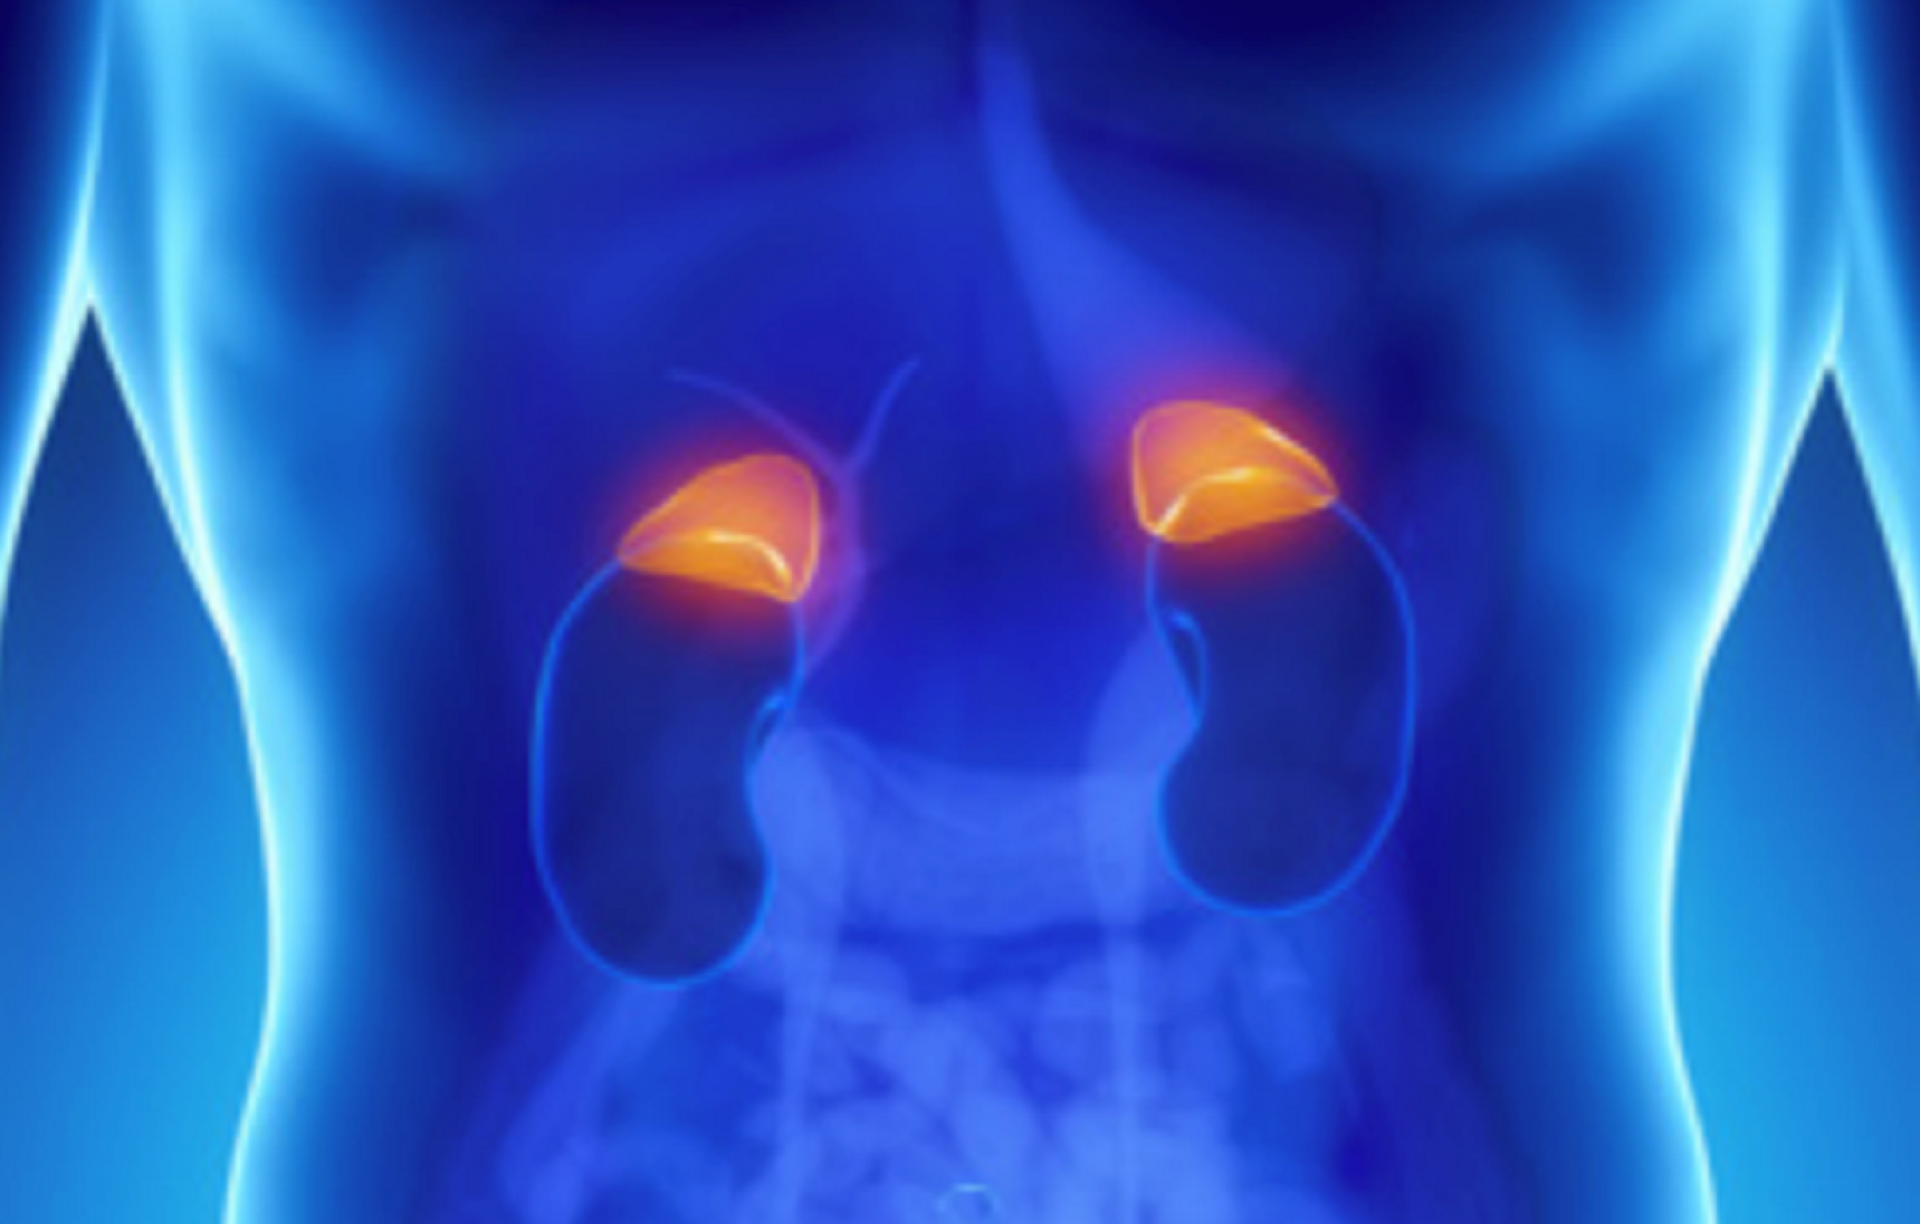 Location of the adrenal glands in the human body